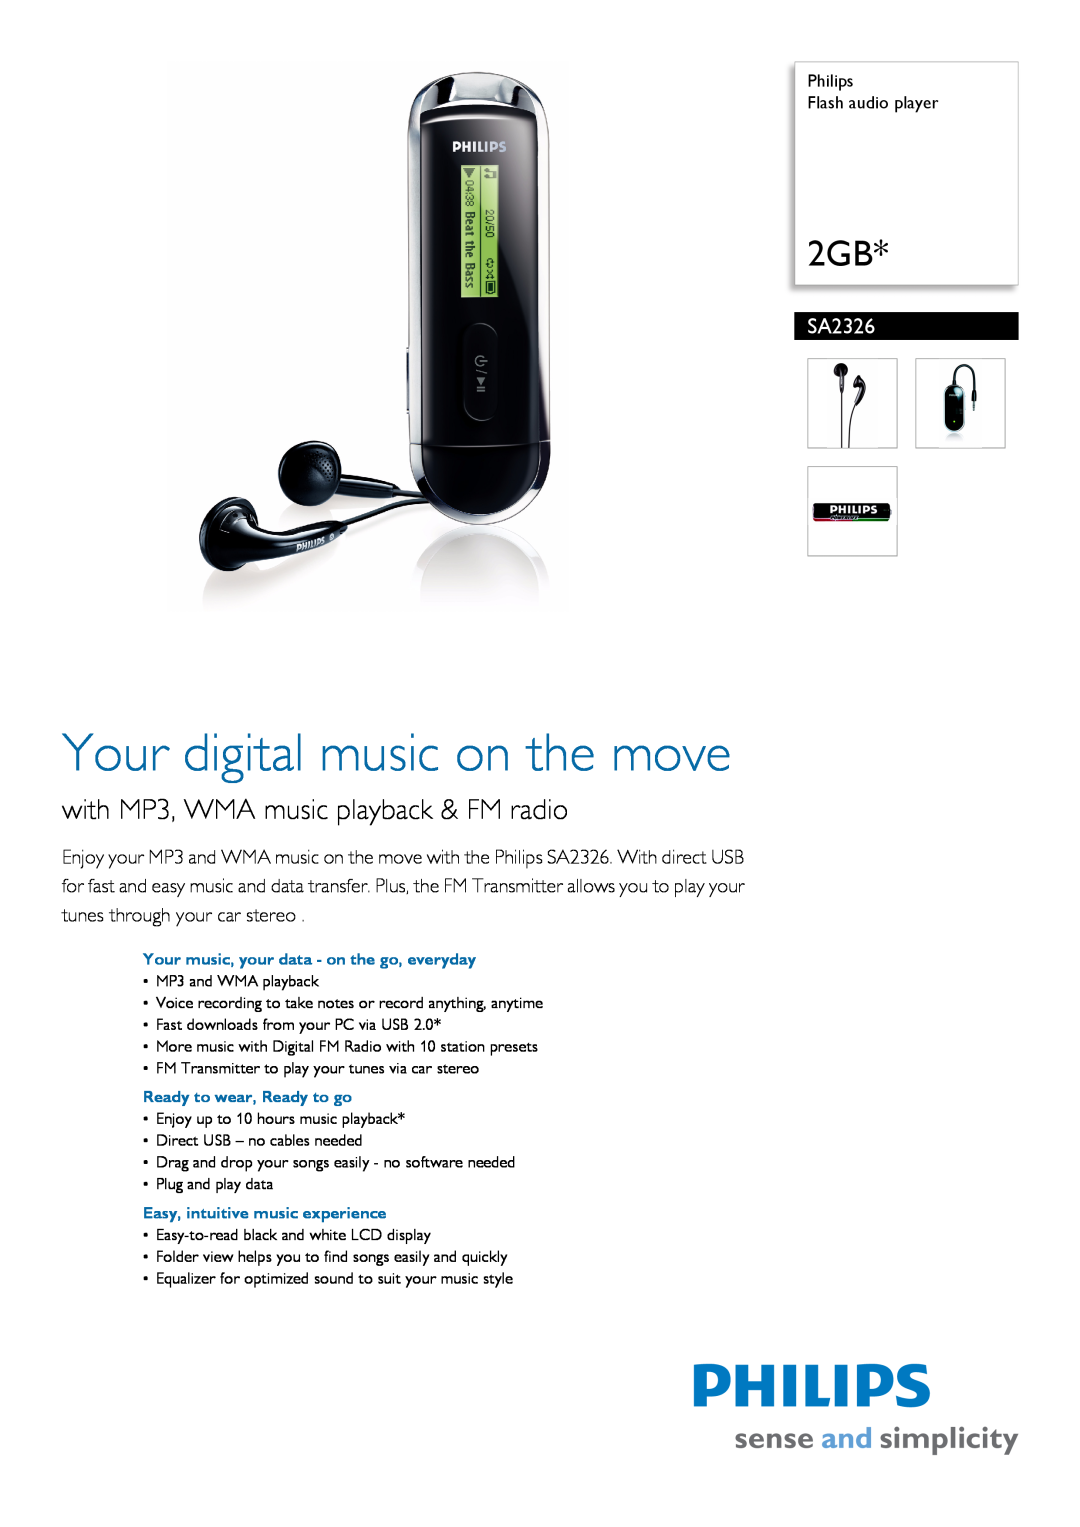 Philips SA2326 manual Philips Flash audio player, Your digital music on the move, with MP3, WMA music playback & FM radio 